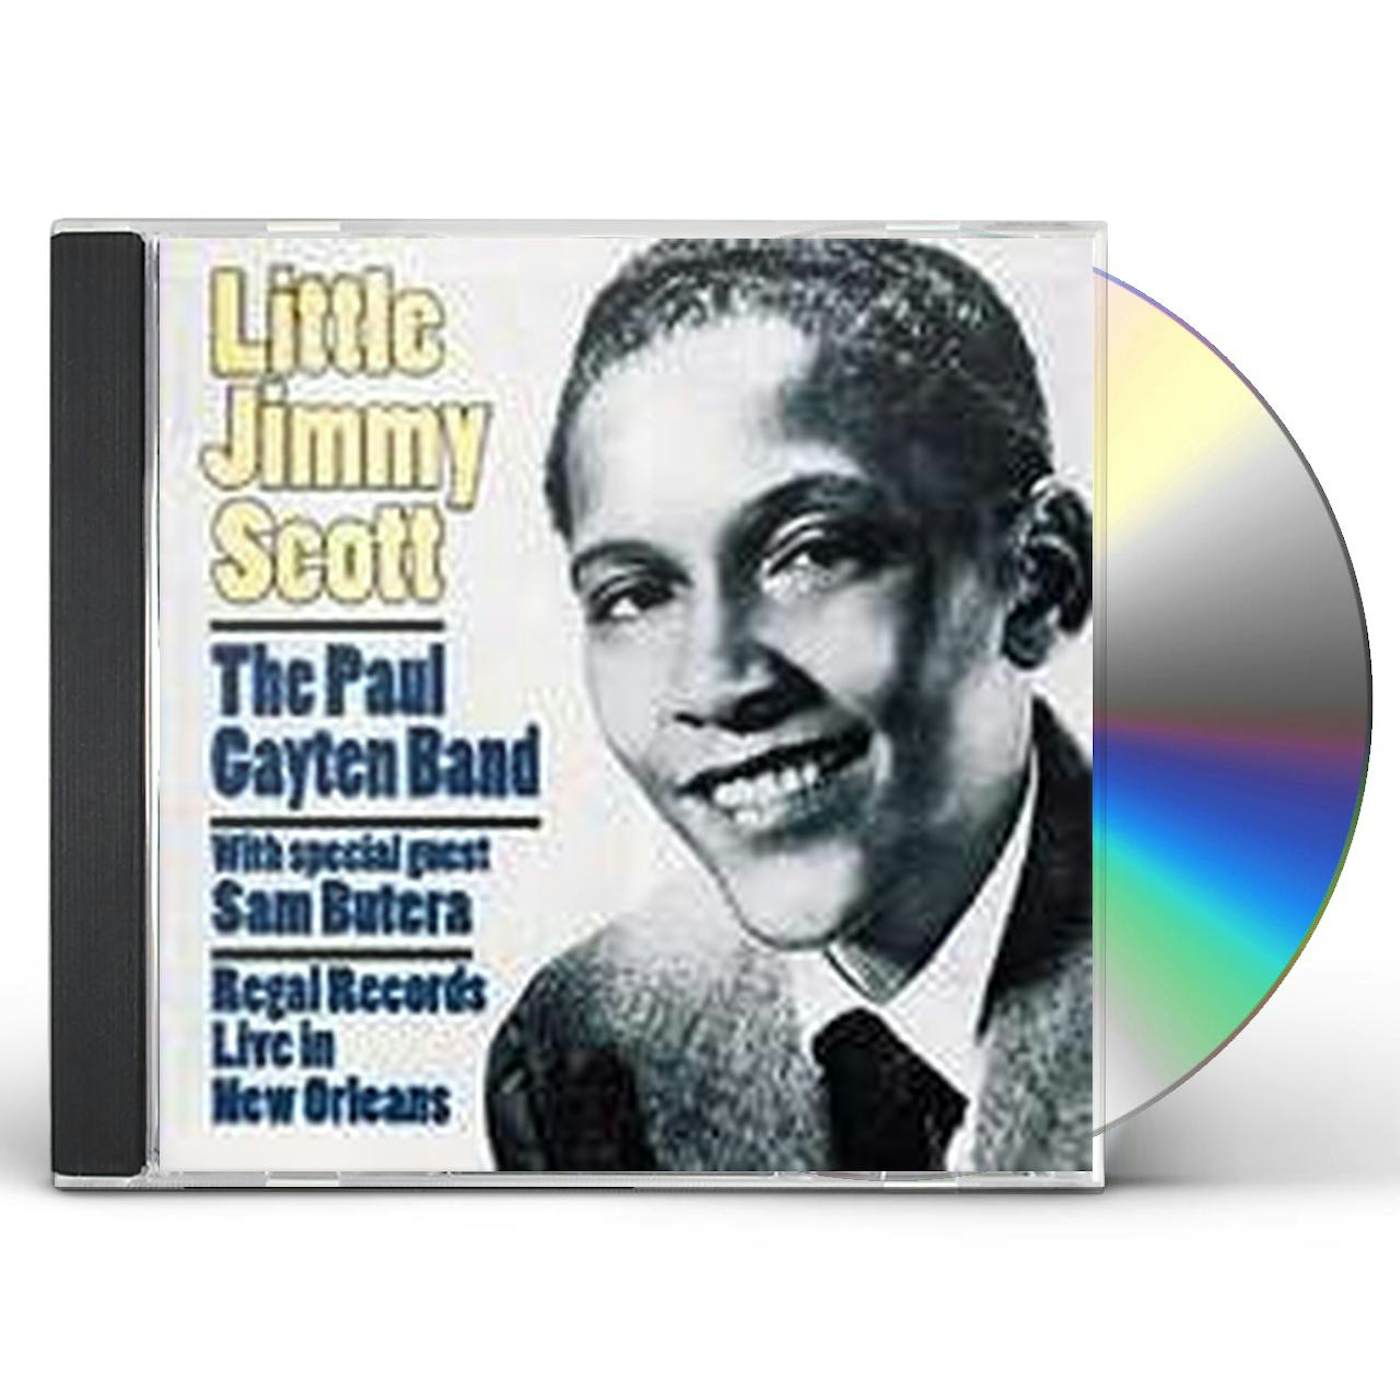 Jimmy Scott REGAL RECORDS: LIVE IN NEW ORLEANS CD